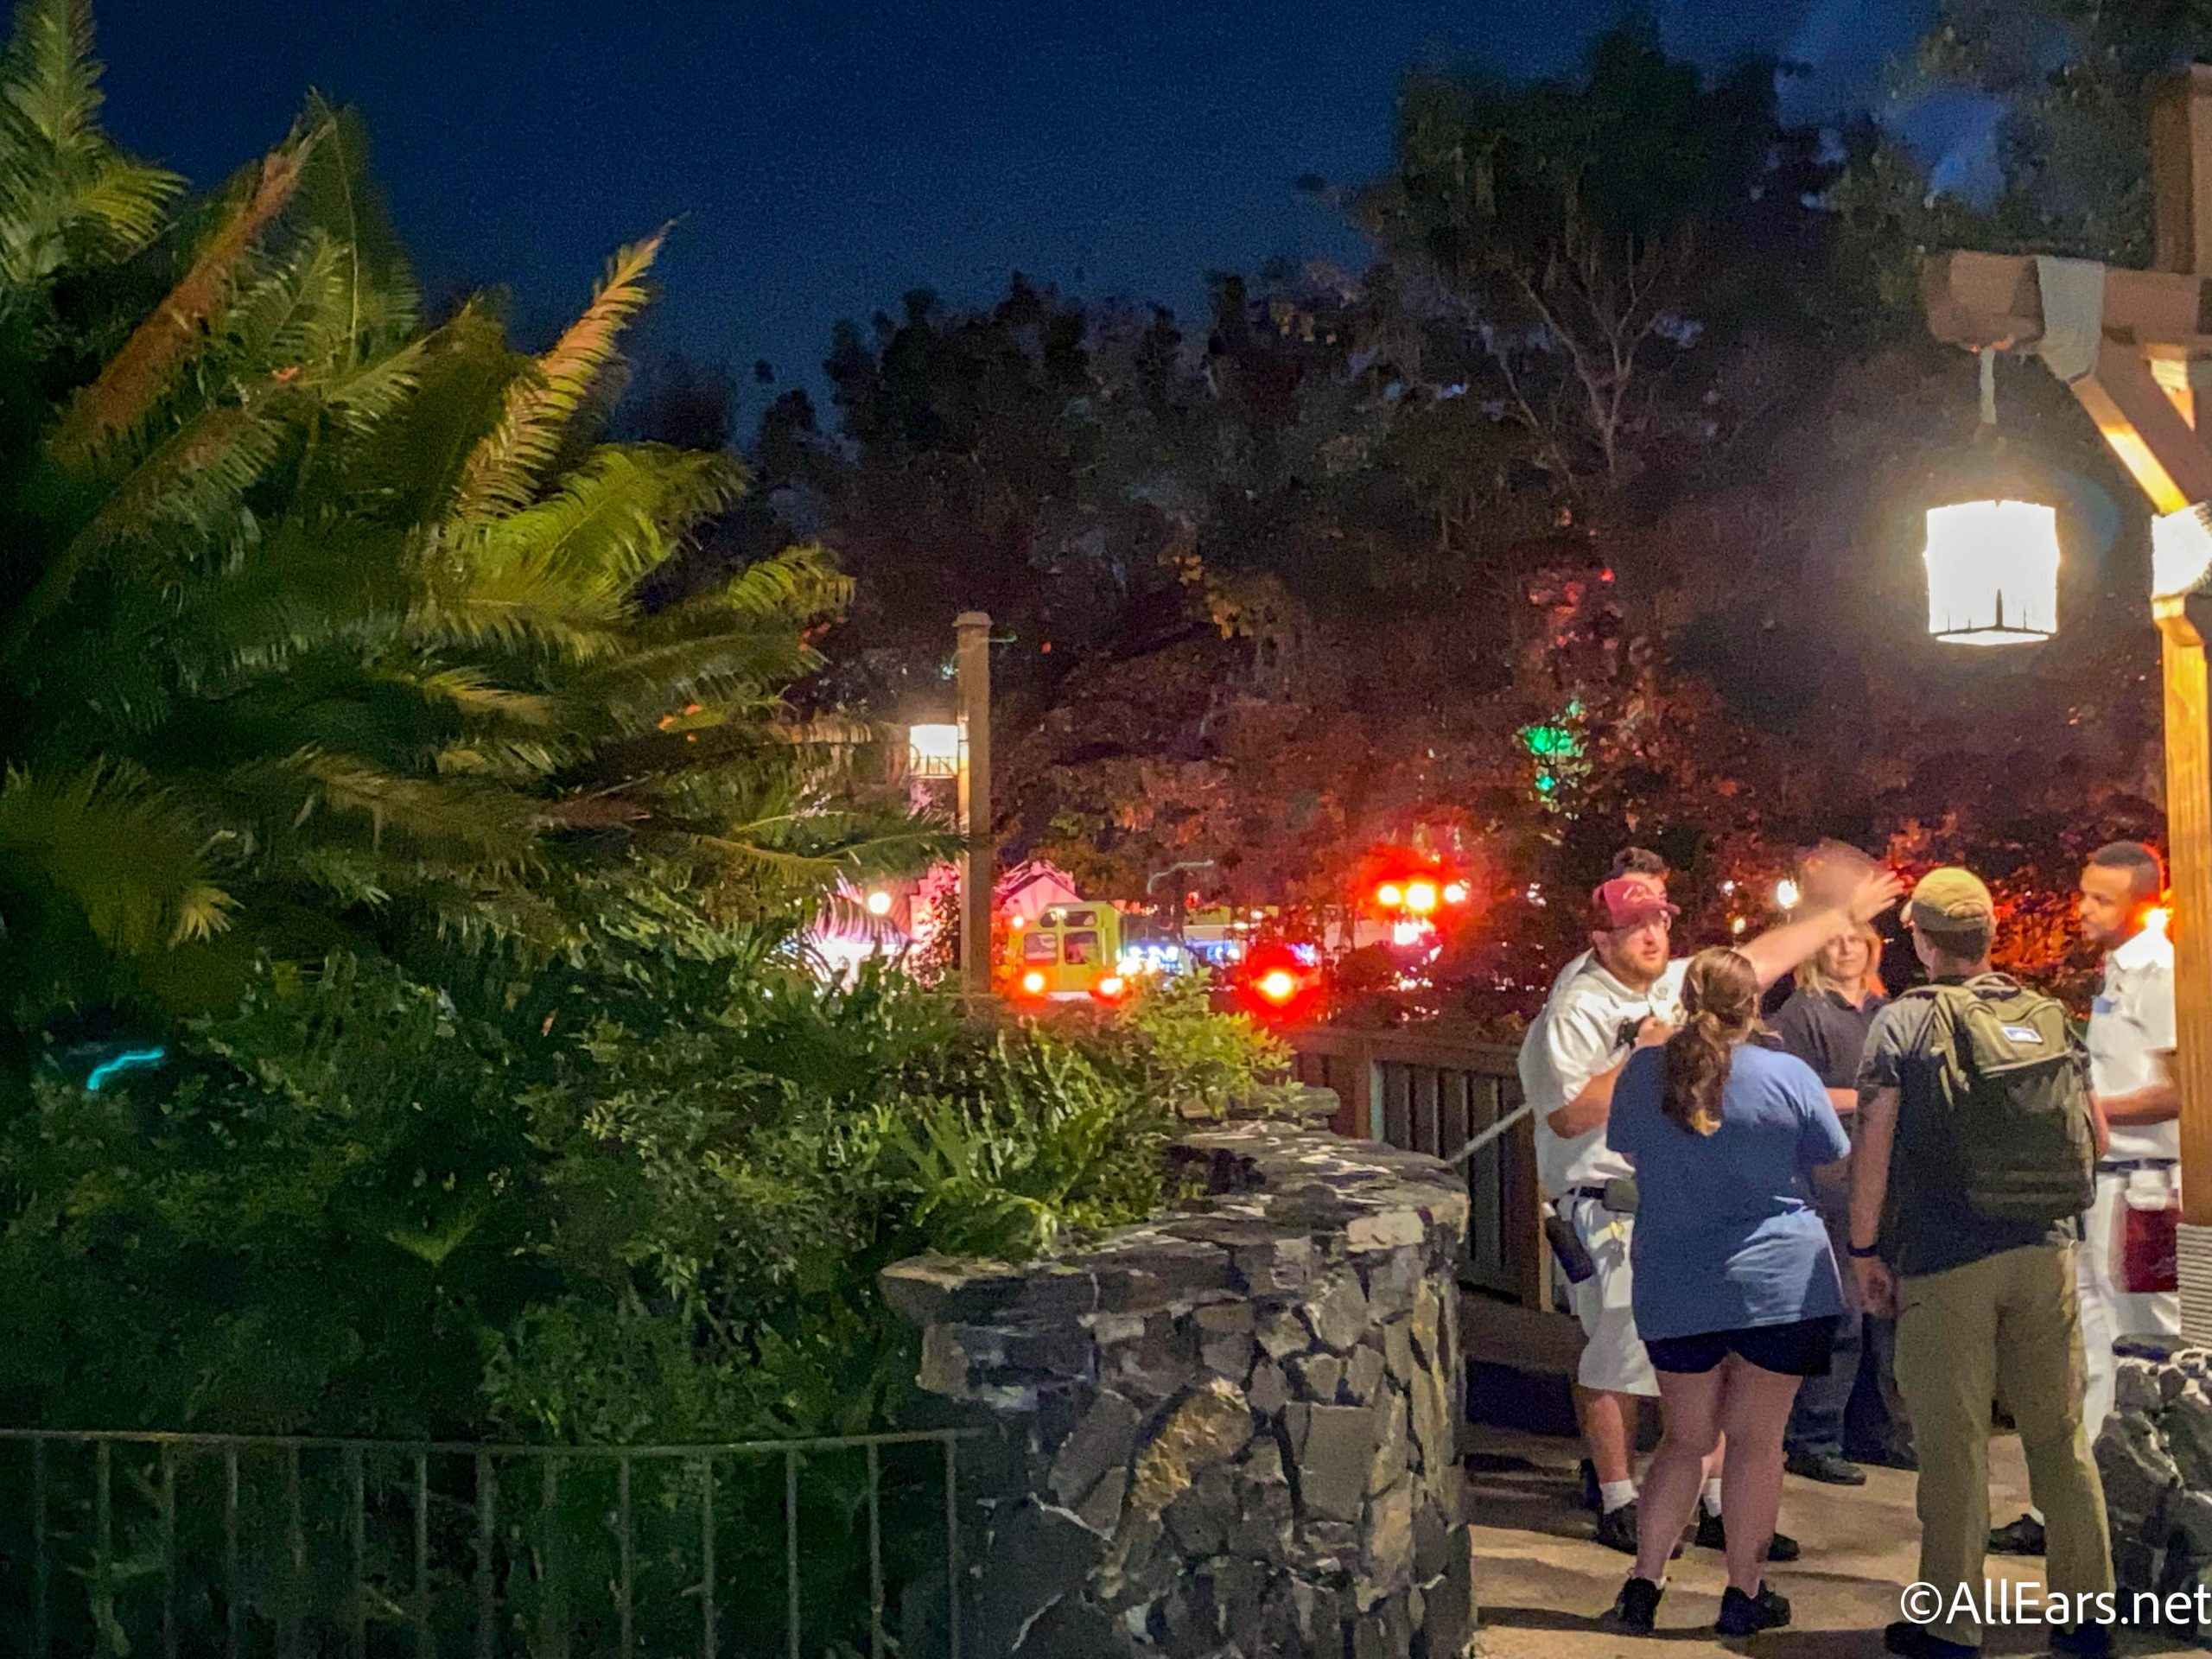 Guests Look on as Flames Shoot From Disney Castle